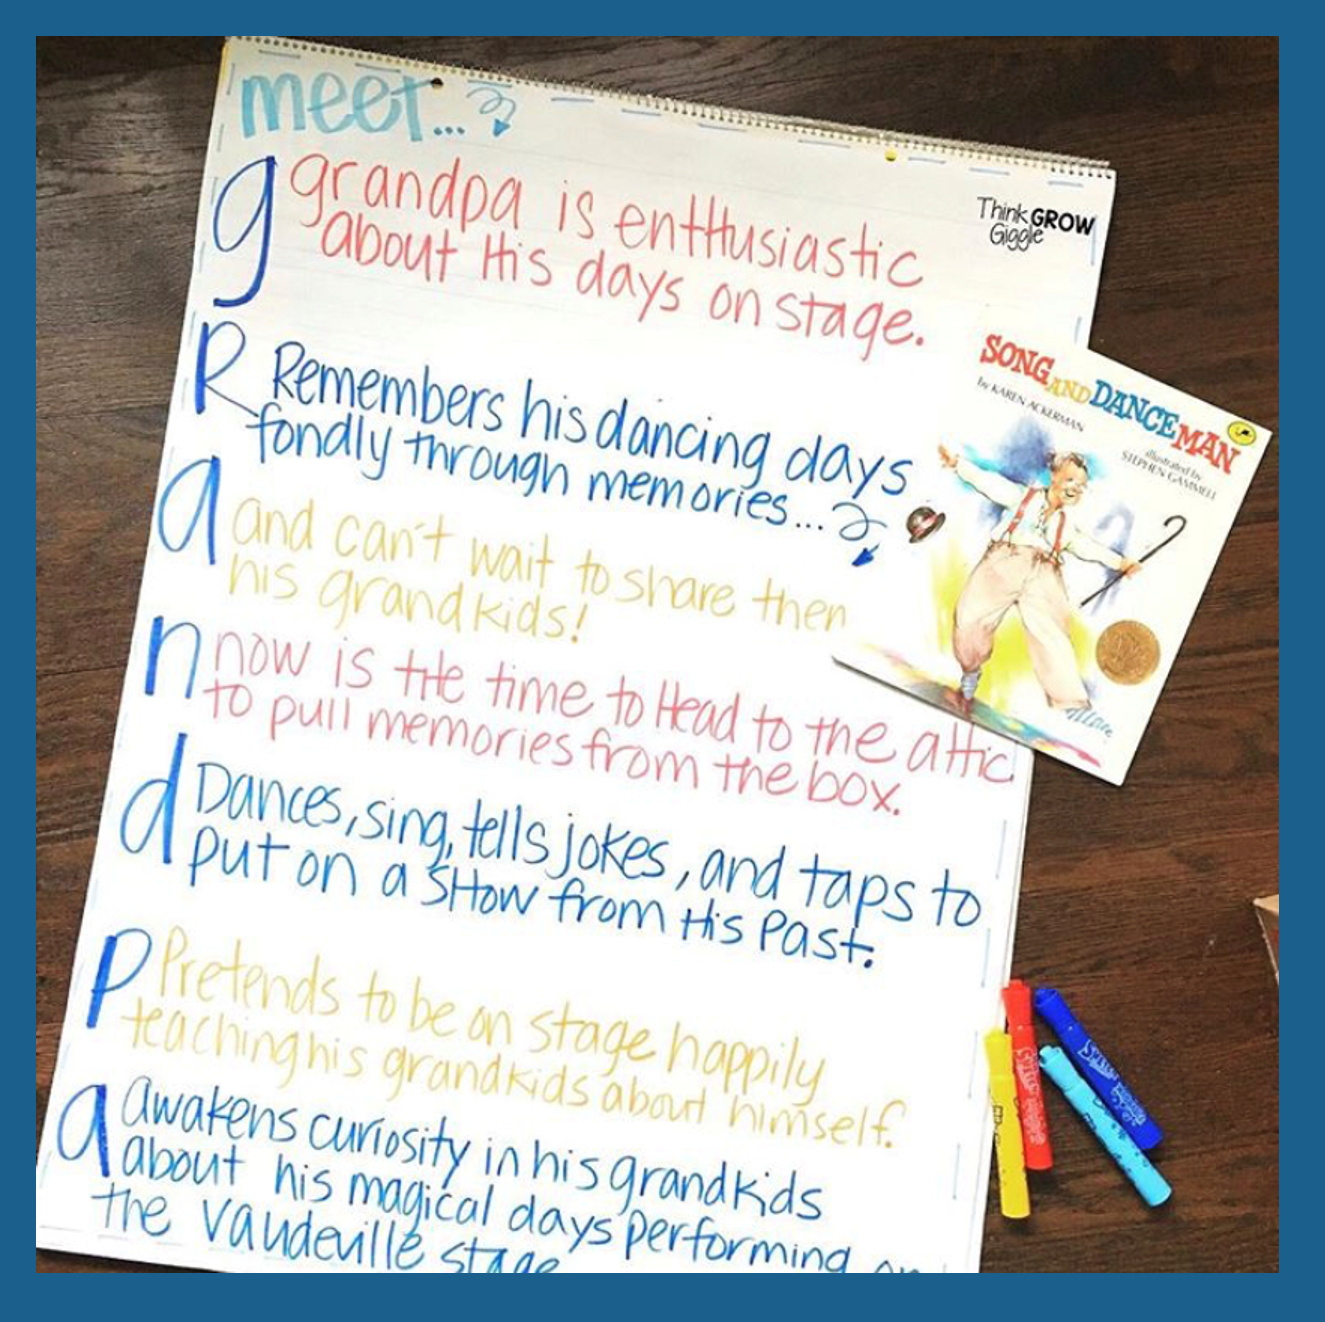 20 Acrostic Poem Ideas to Challenge Upper Elementary Students